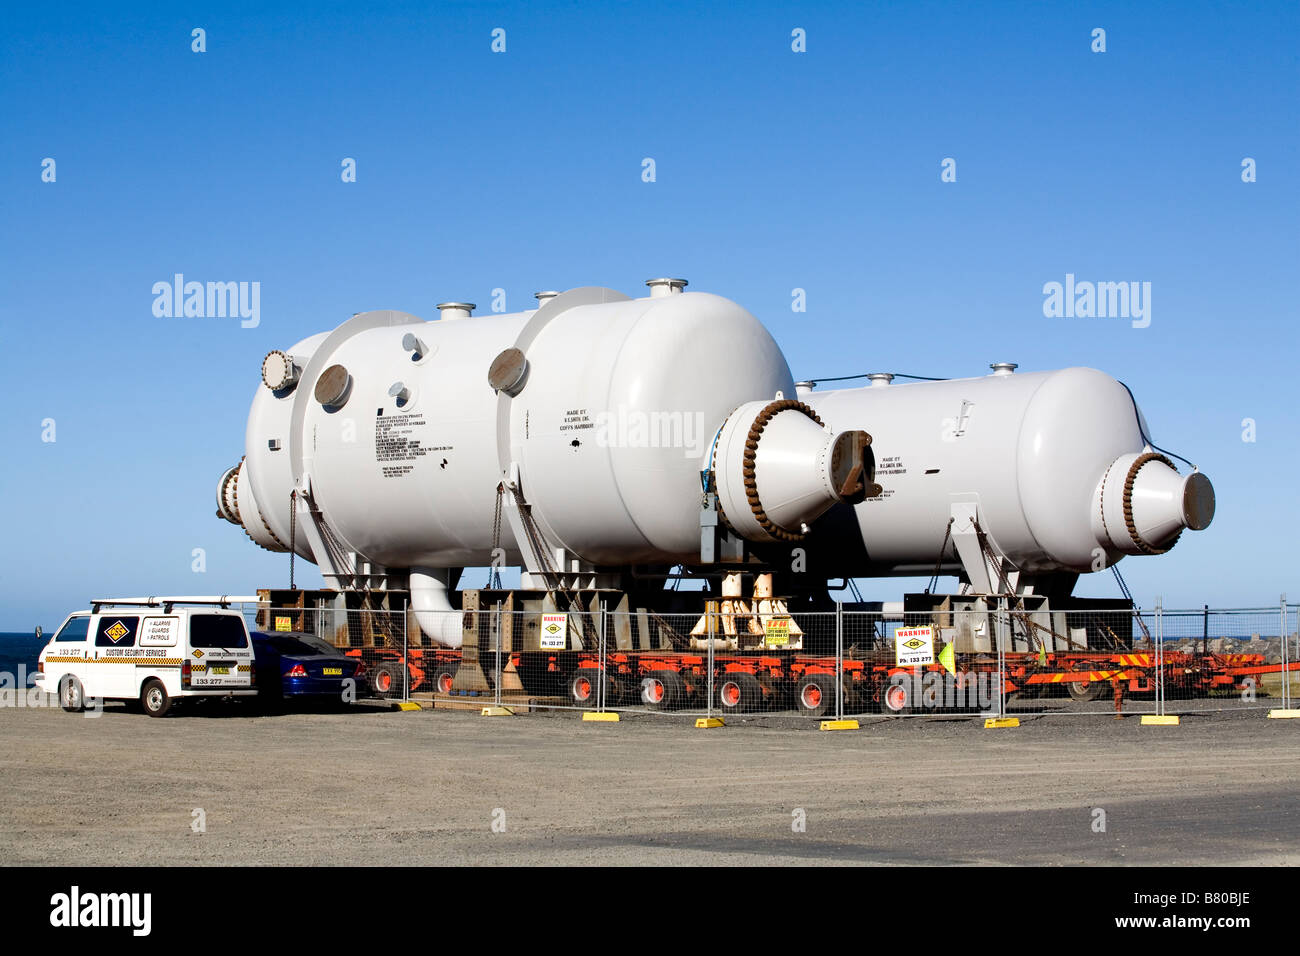 Two shell and tube heat exchanger pressure vessels waiting for transport to their destination at a Liquified Natural Gas Project Stock Photo